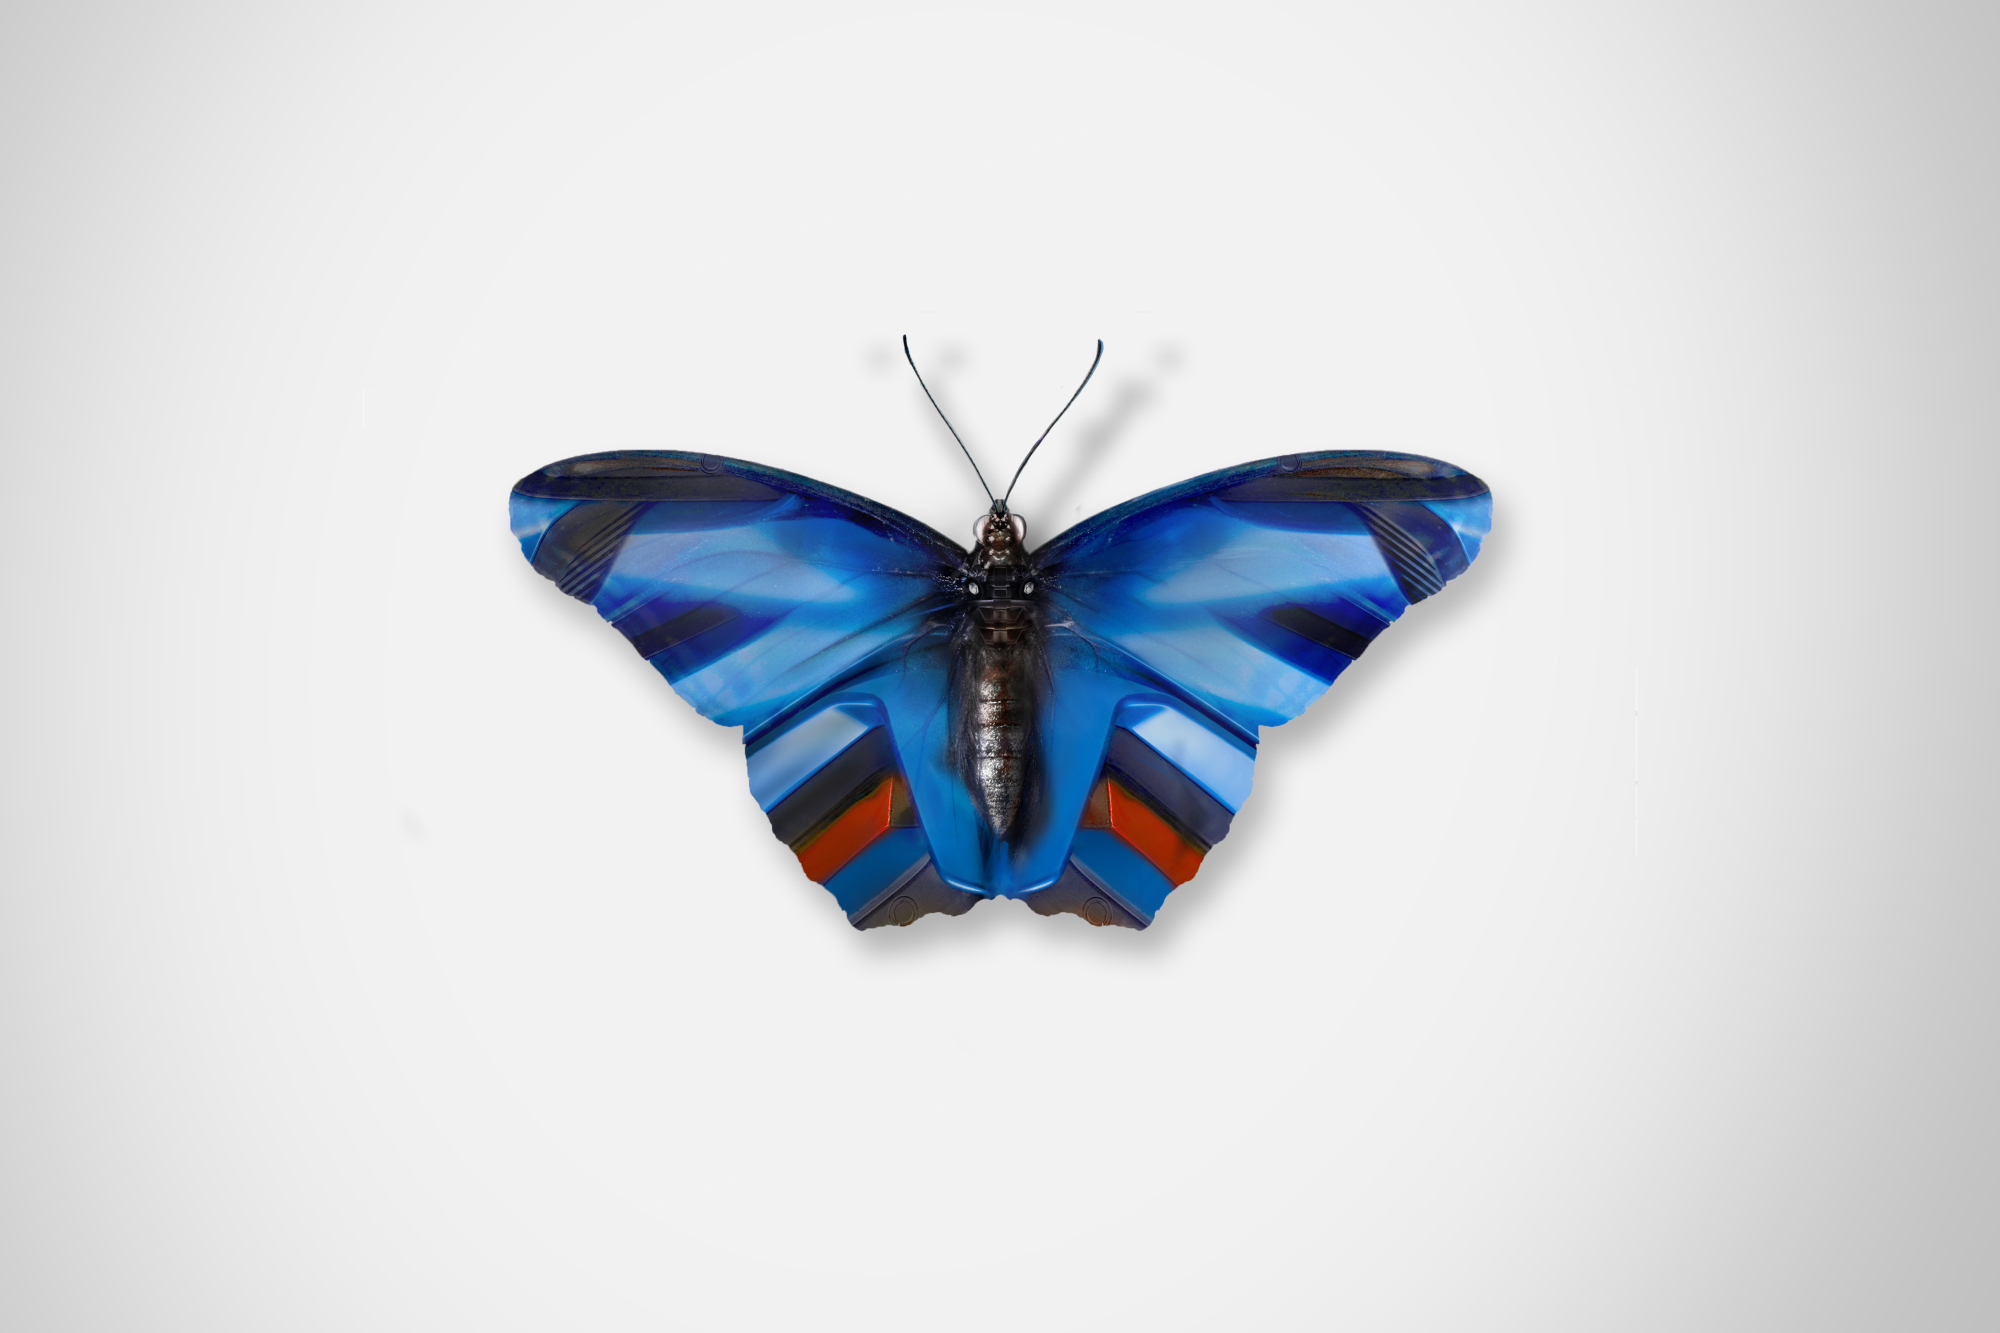 Ford_Butterflies_Concept_The_Beauty_Of_Change_DKLG_Design_006.png